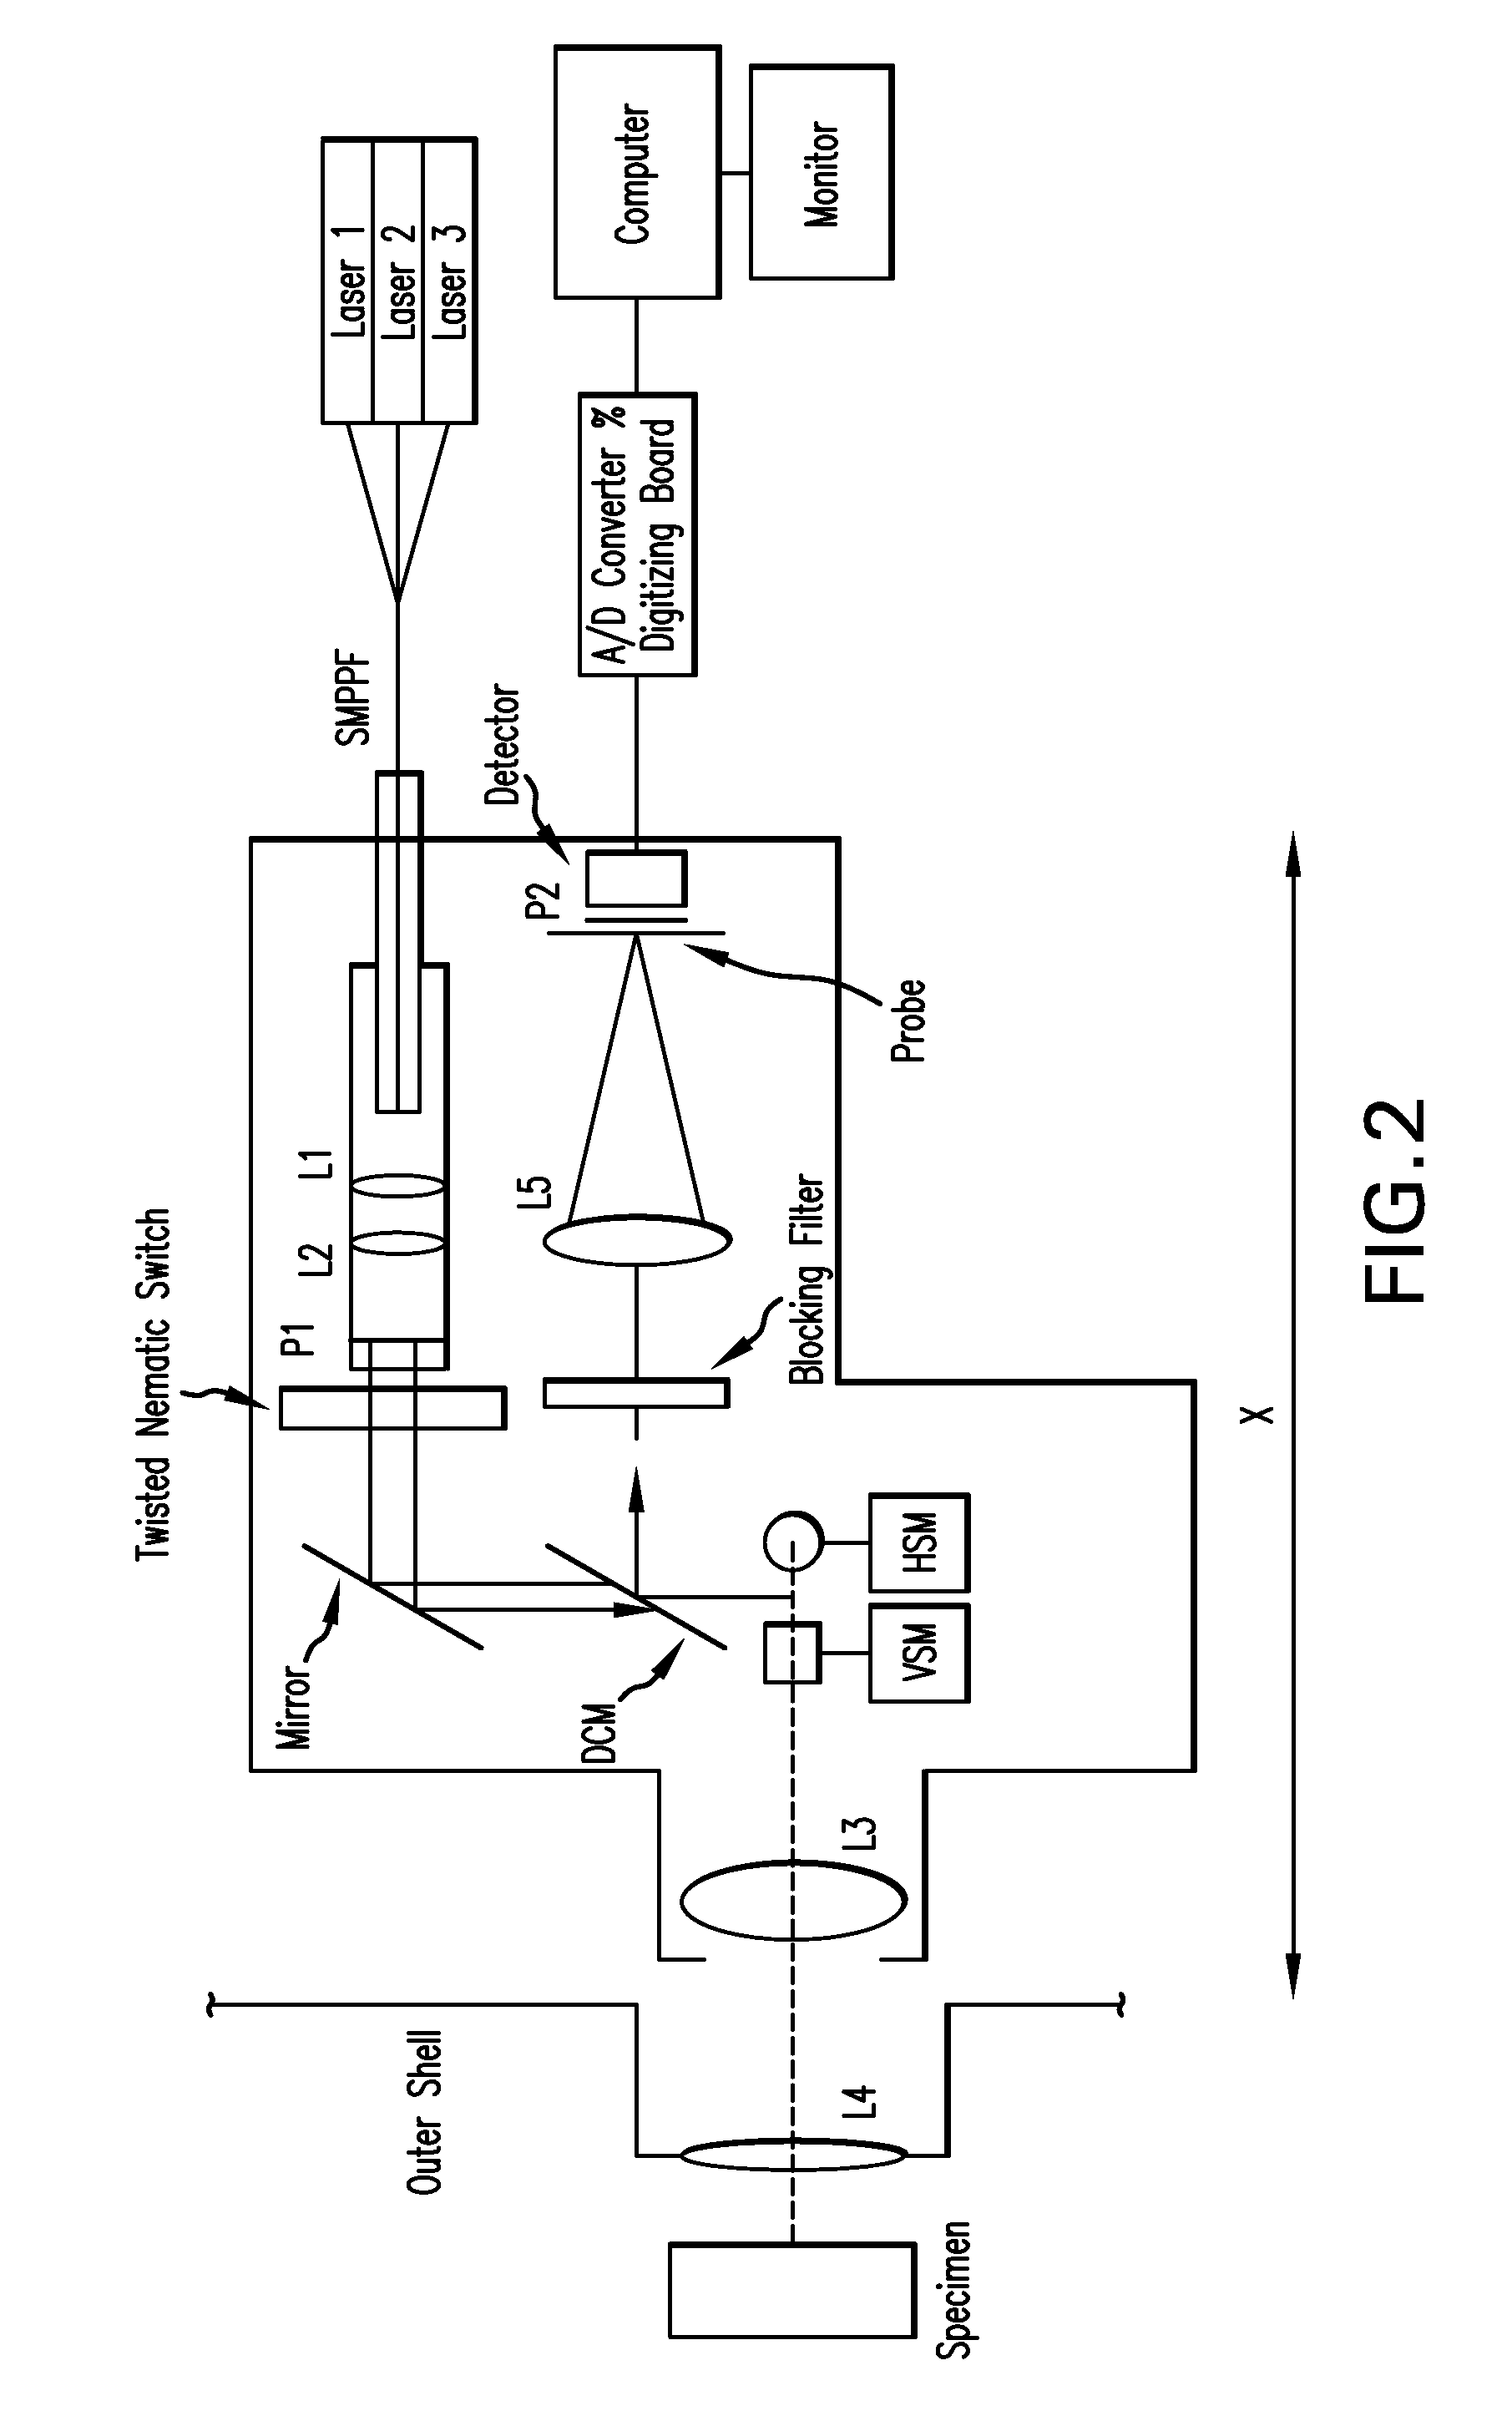 Method and apparatus for the non-invasive measurement of tissue function and metabolism by determination of steady-state fluorescence anisotropy